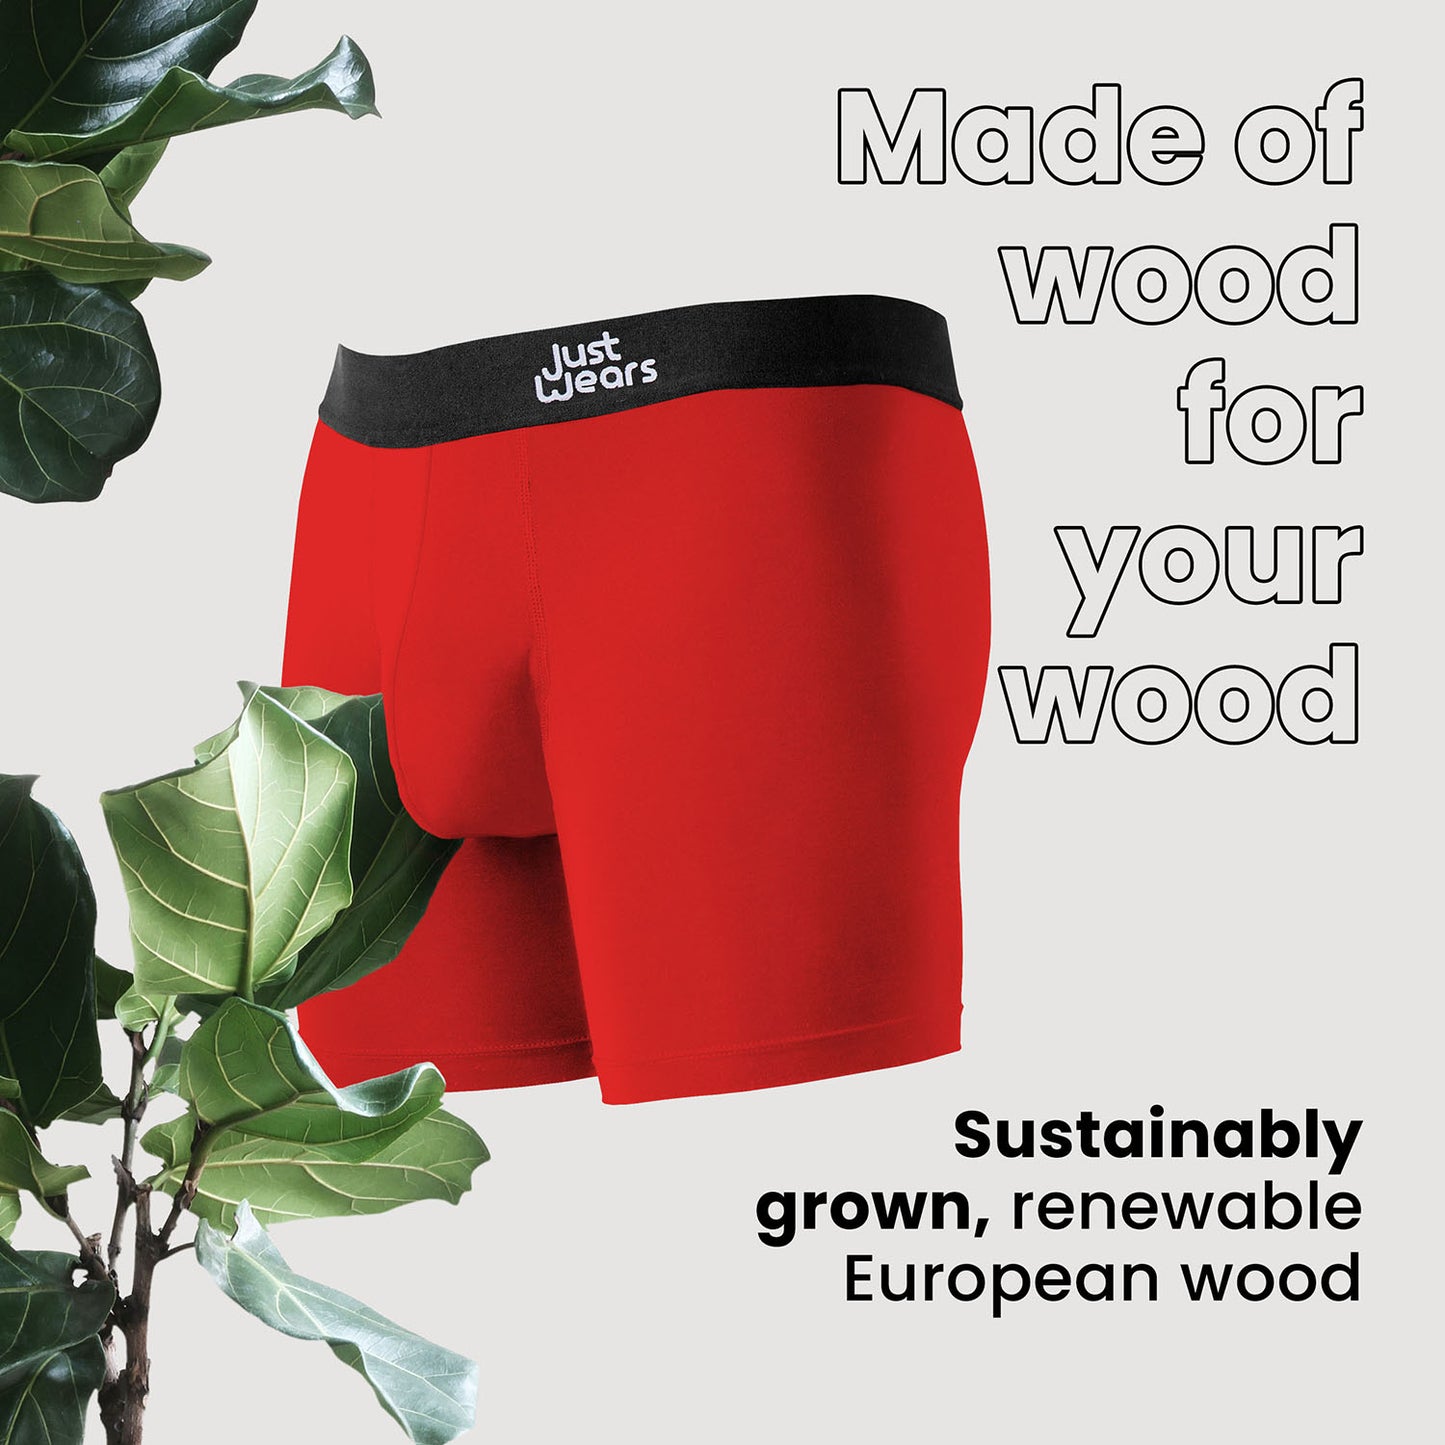 Boxer Briefs Duo Pack Europe (color - Green & Red)